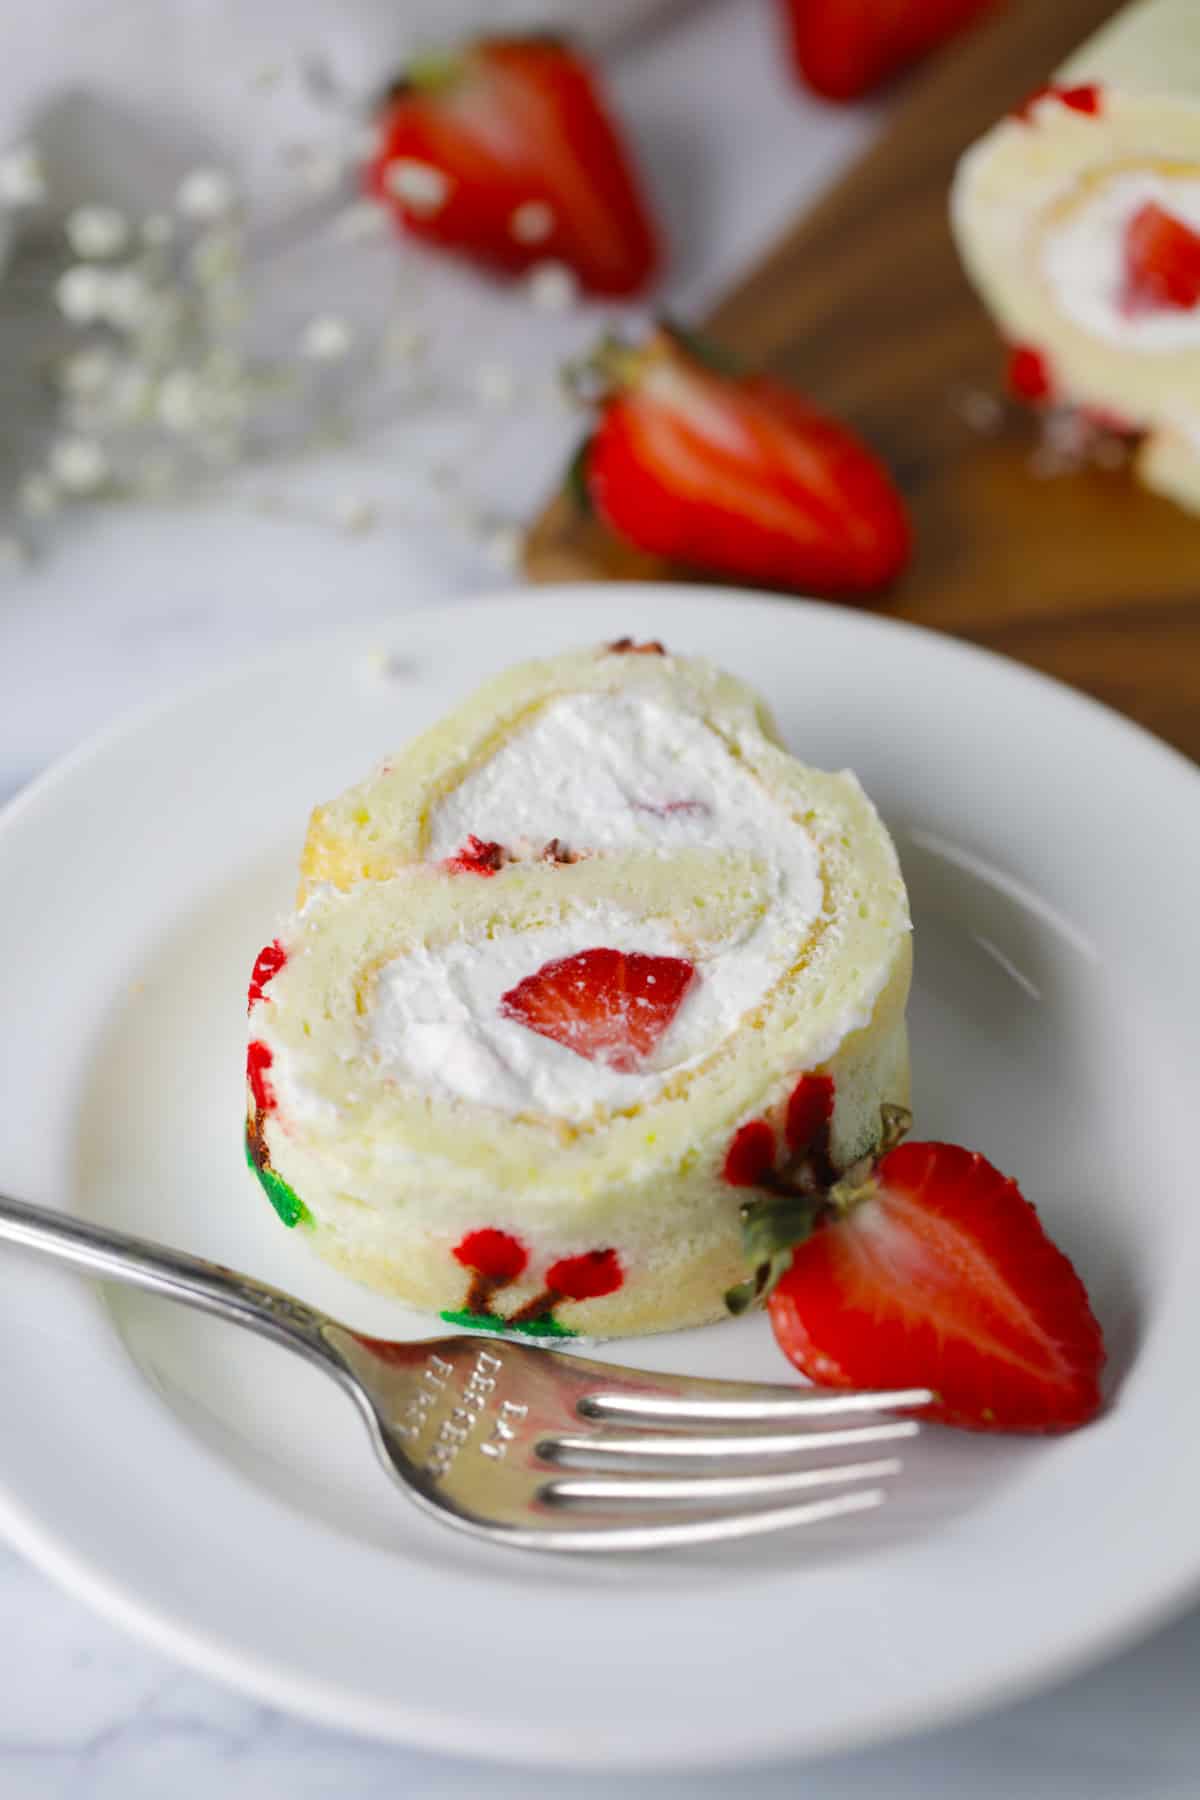 Slice of cake roll with whipped cream and fresh strawberries.